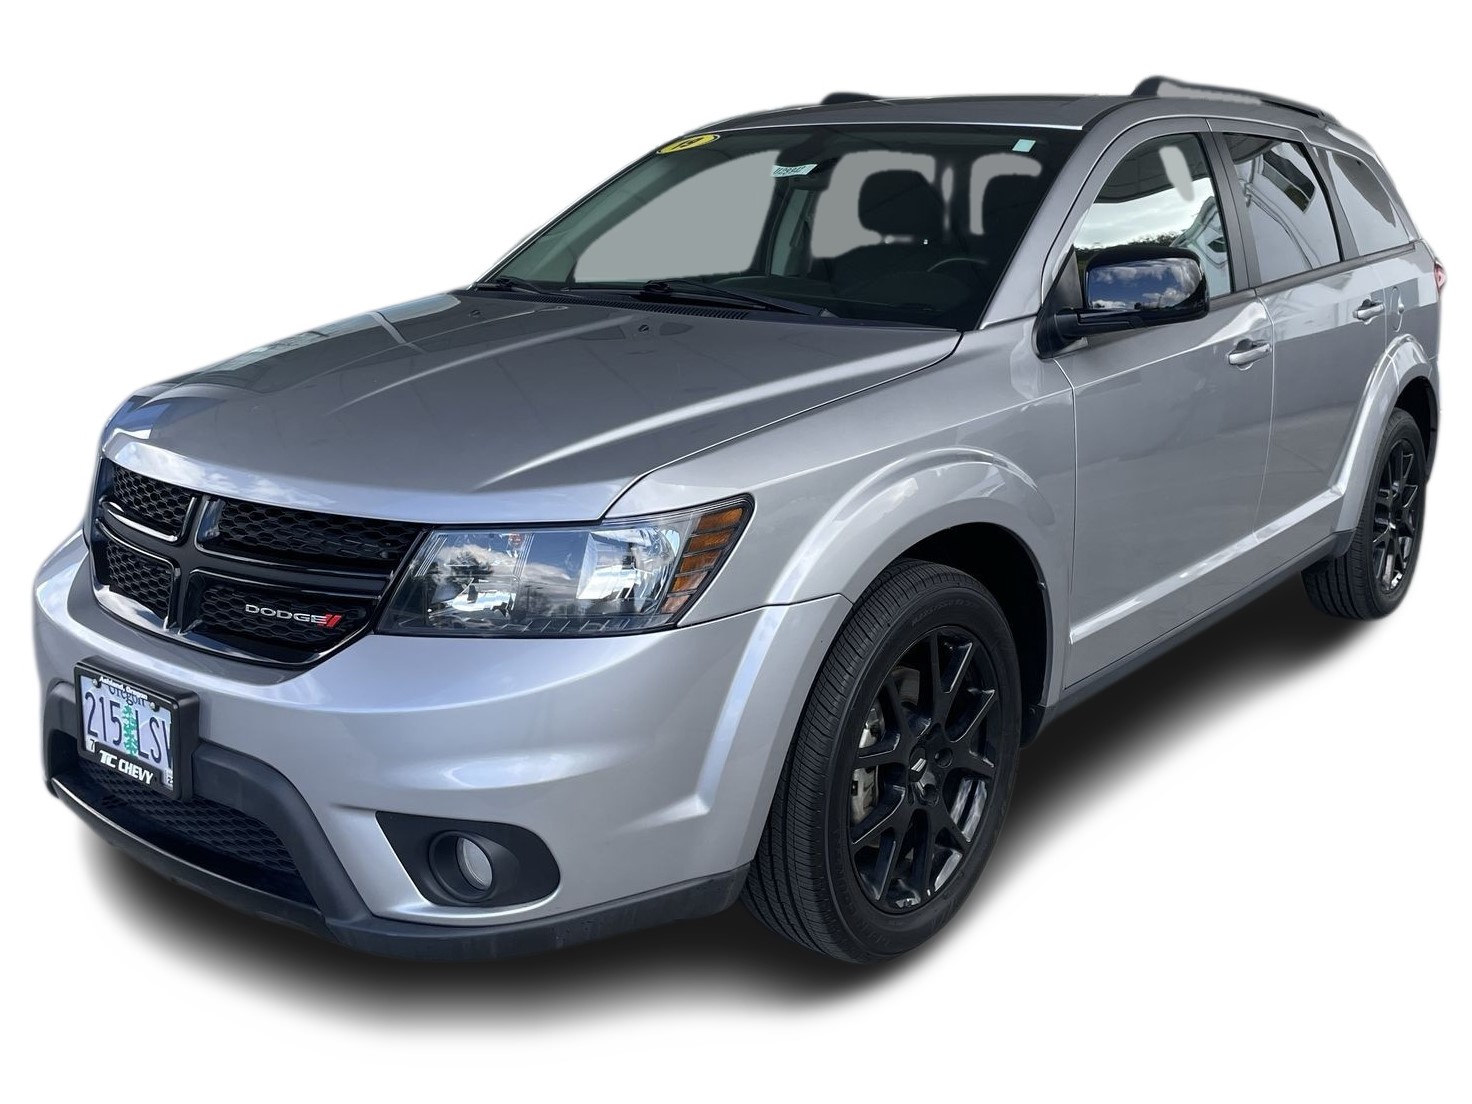 Learn About This 2019 Dodge Journey For Sale in ASHLAND, OR, VIN =  3C4PDCBG0KT687033, SN# U29942